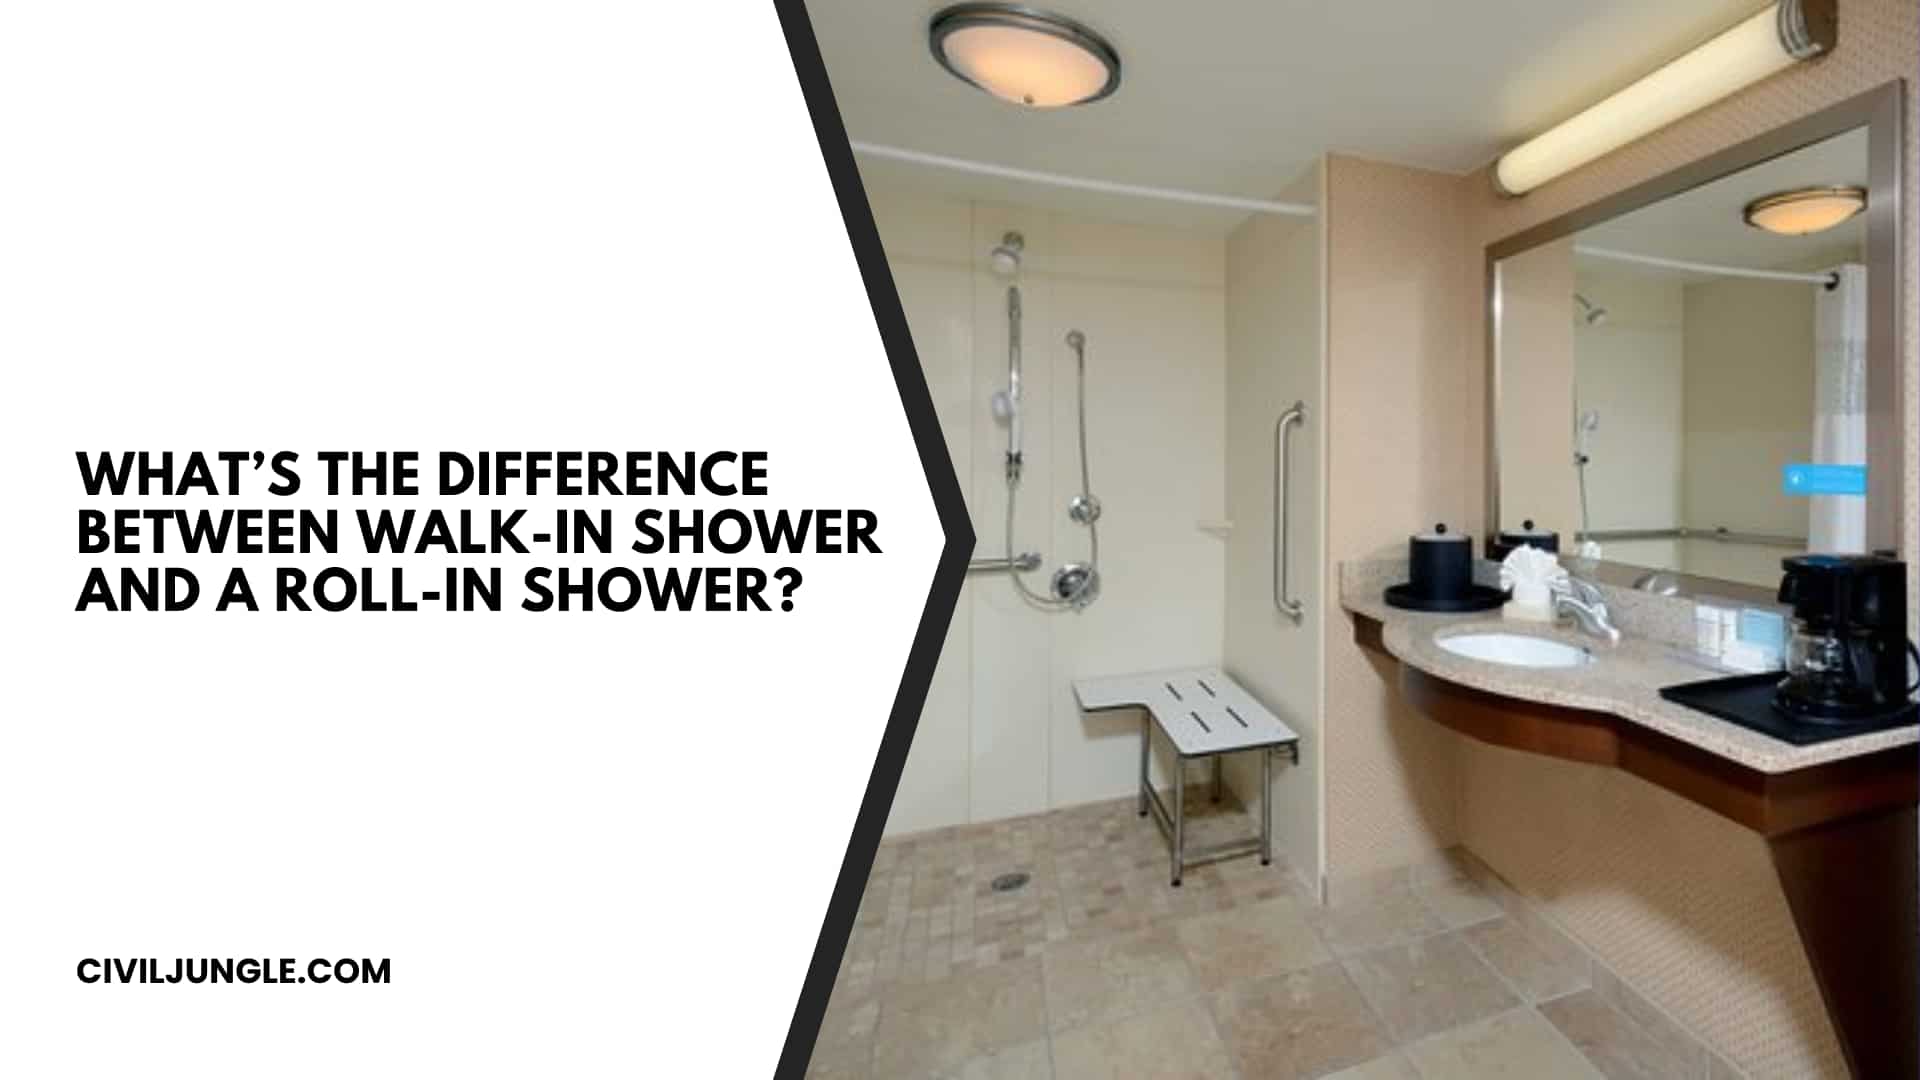 What’s the Difference Between Walk-in Shower and a Roll-in Shower?